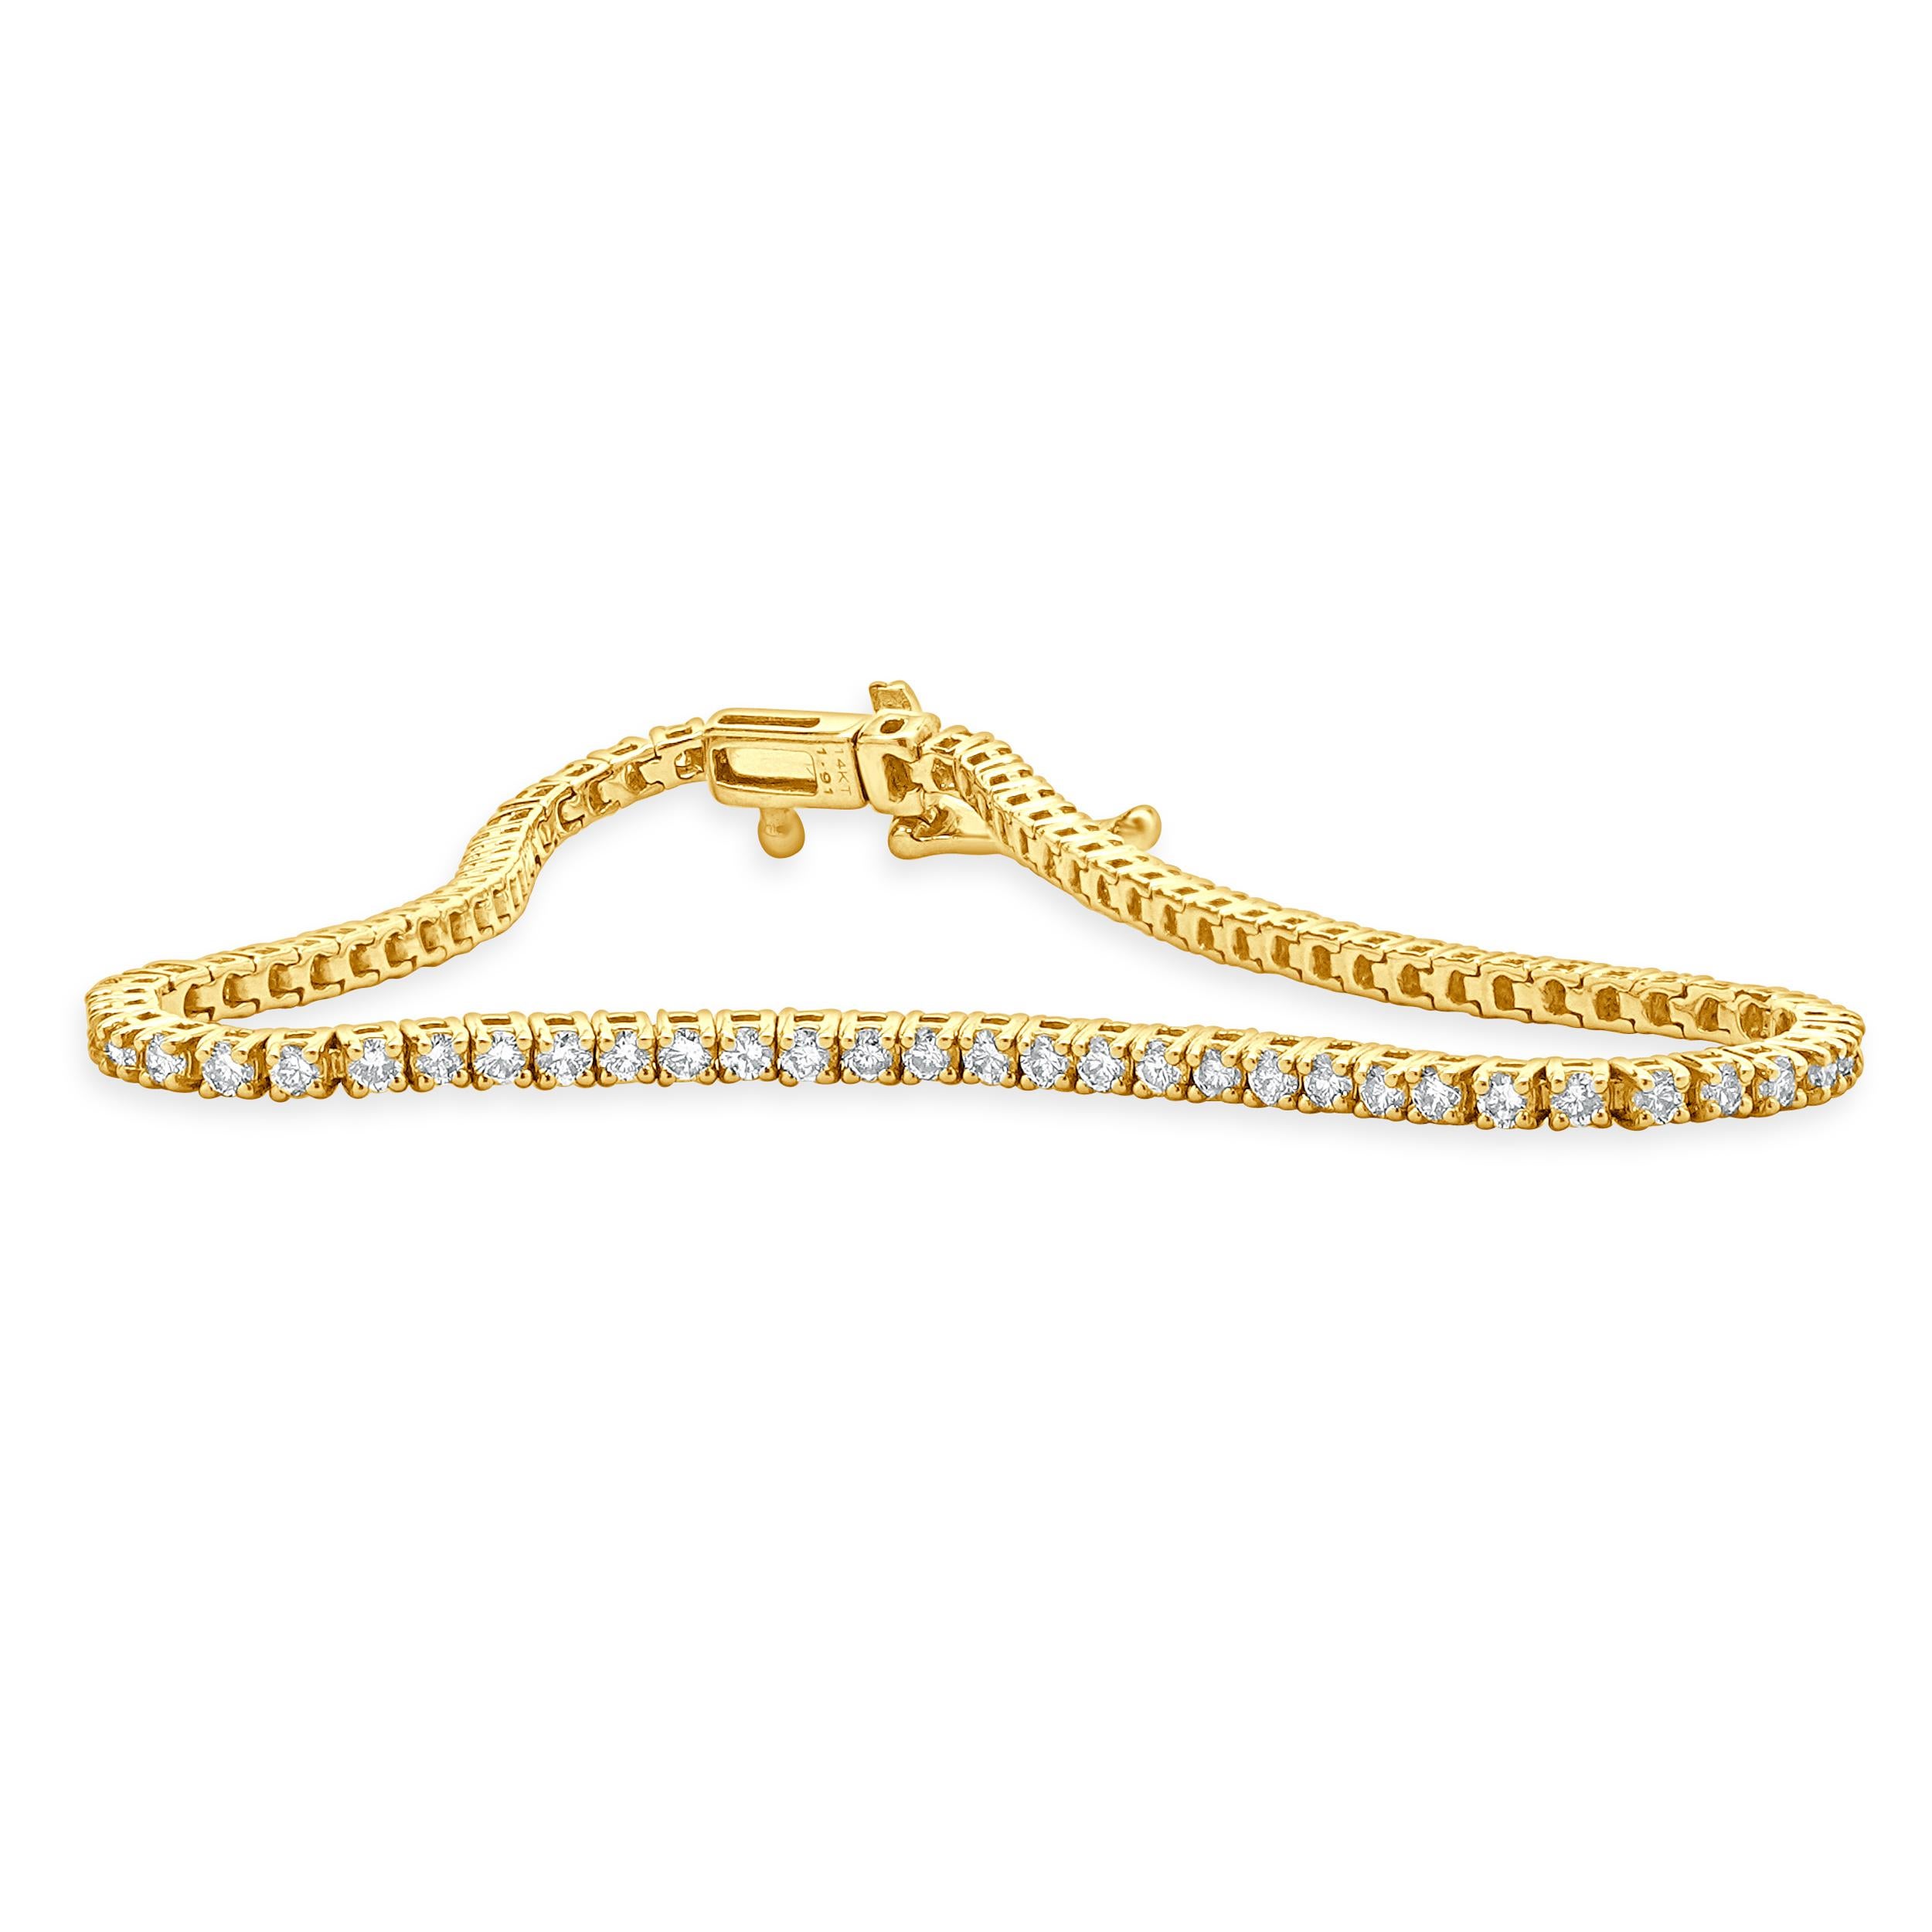 Designer: custom
Material: 14K yellow gold
Diamond: 78 round brilliant cut = 1.92cttw
Color: I
Clarity: SI1
Dimensions: bracelet will fit up to a 7-inch wrist
Weight: 6.30 grams